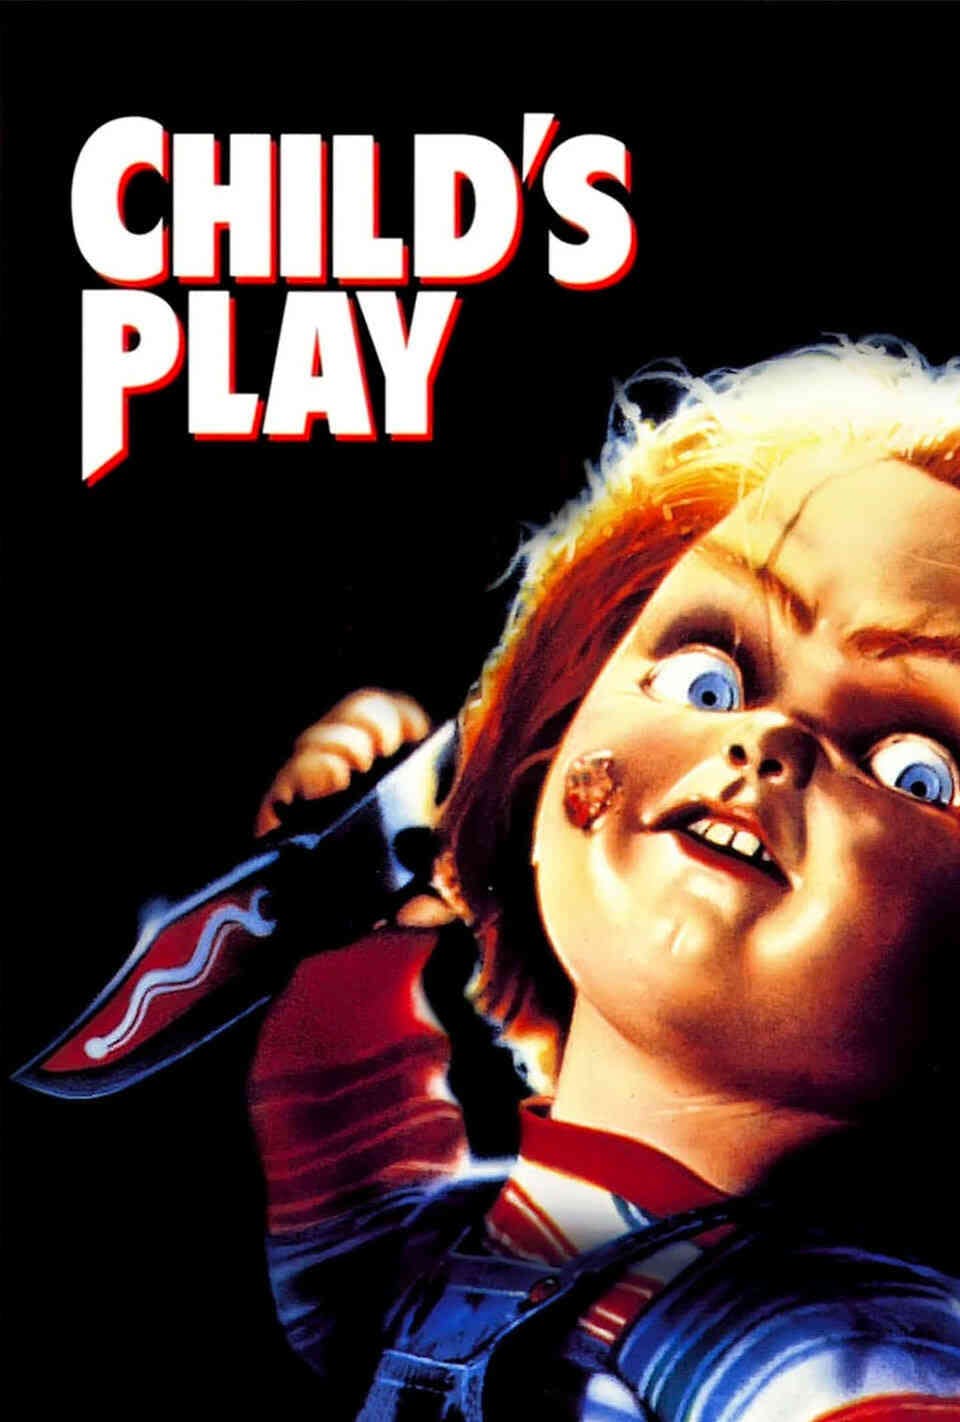 Read Child's Play screenplay (poster)